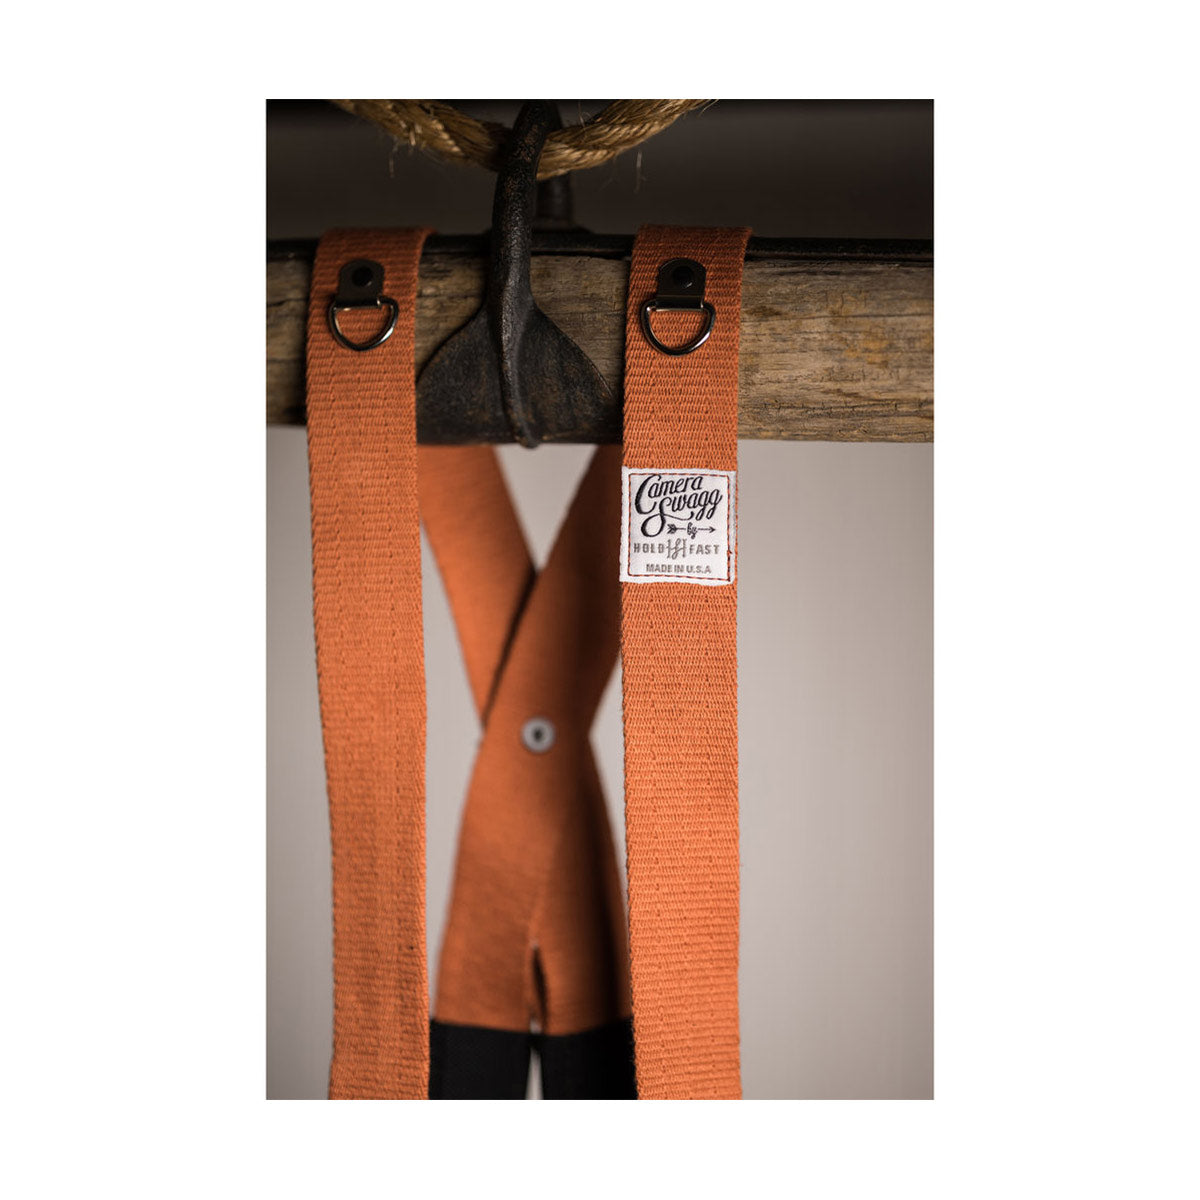 HoldFast Money Maker Two-Camera Swagg Harness (Cotton Canvas Copper)